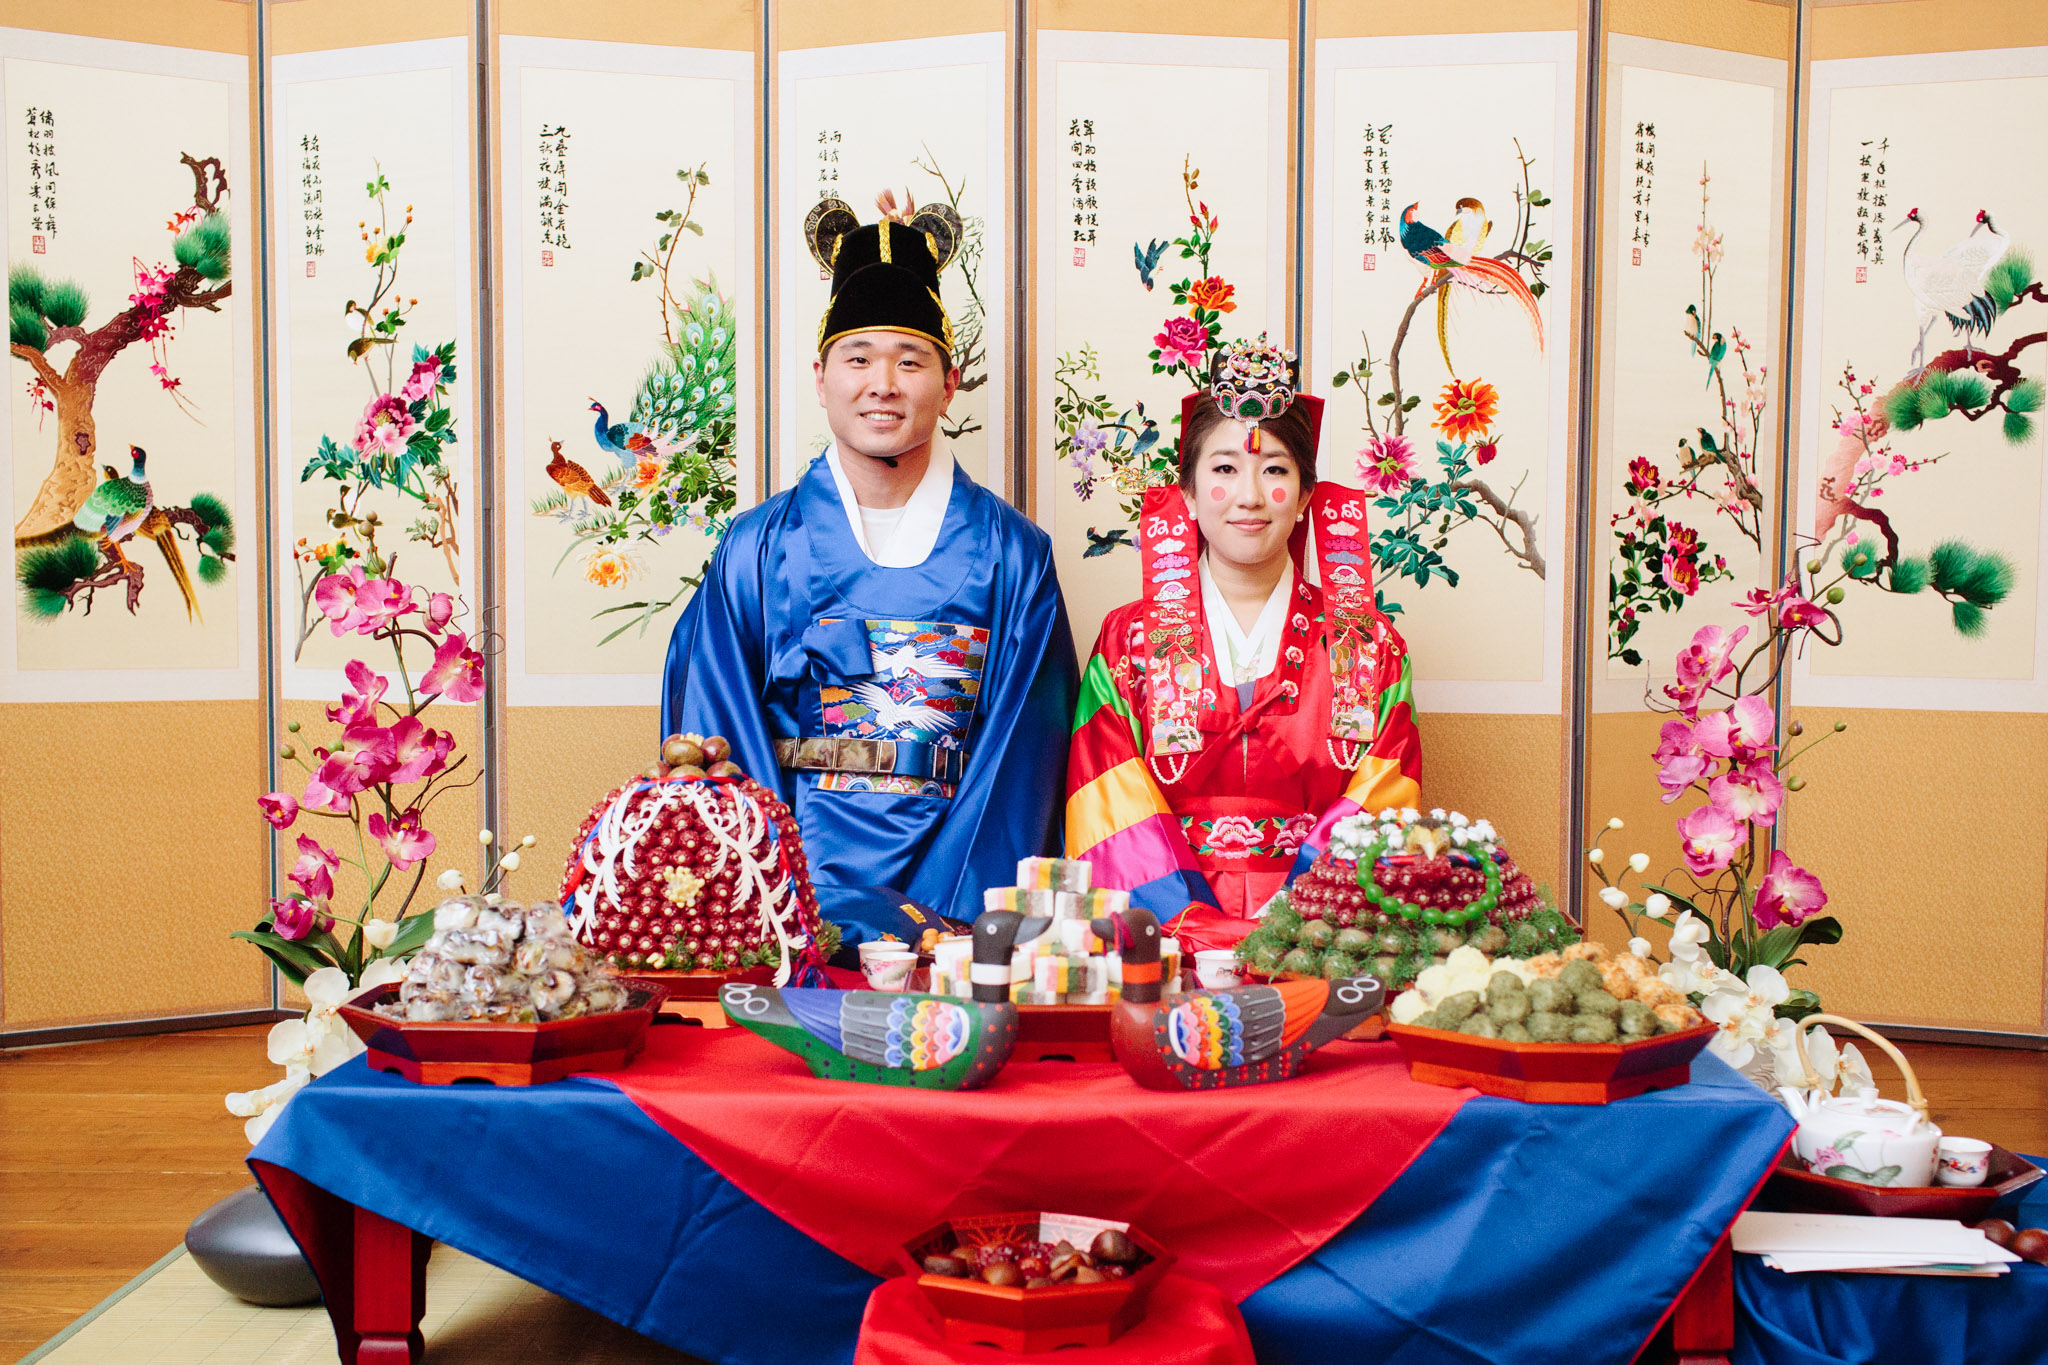 Photos of a traditional Korean Paebaek Ceremony dripping in culture set in Atlanta at Summerour Studio by wedding photographer Rebecca Cerasani